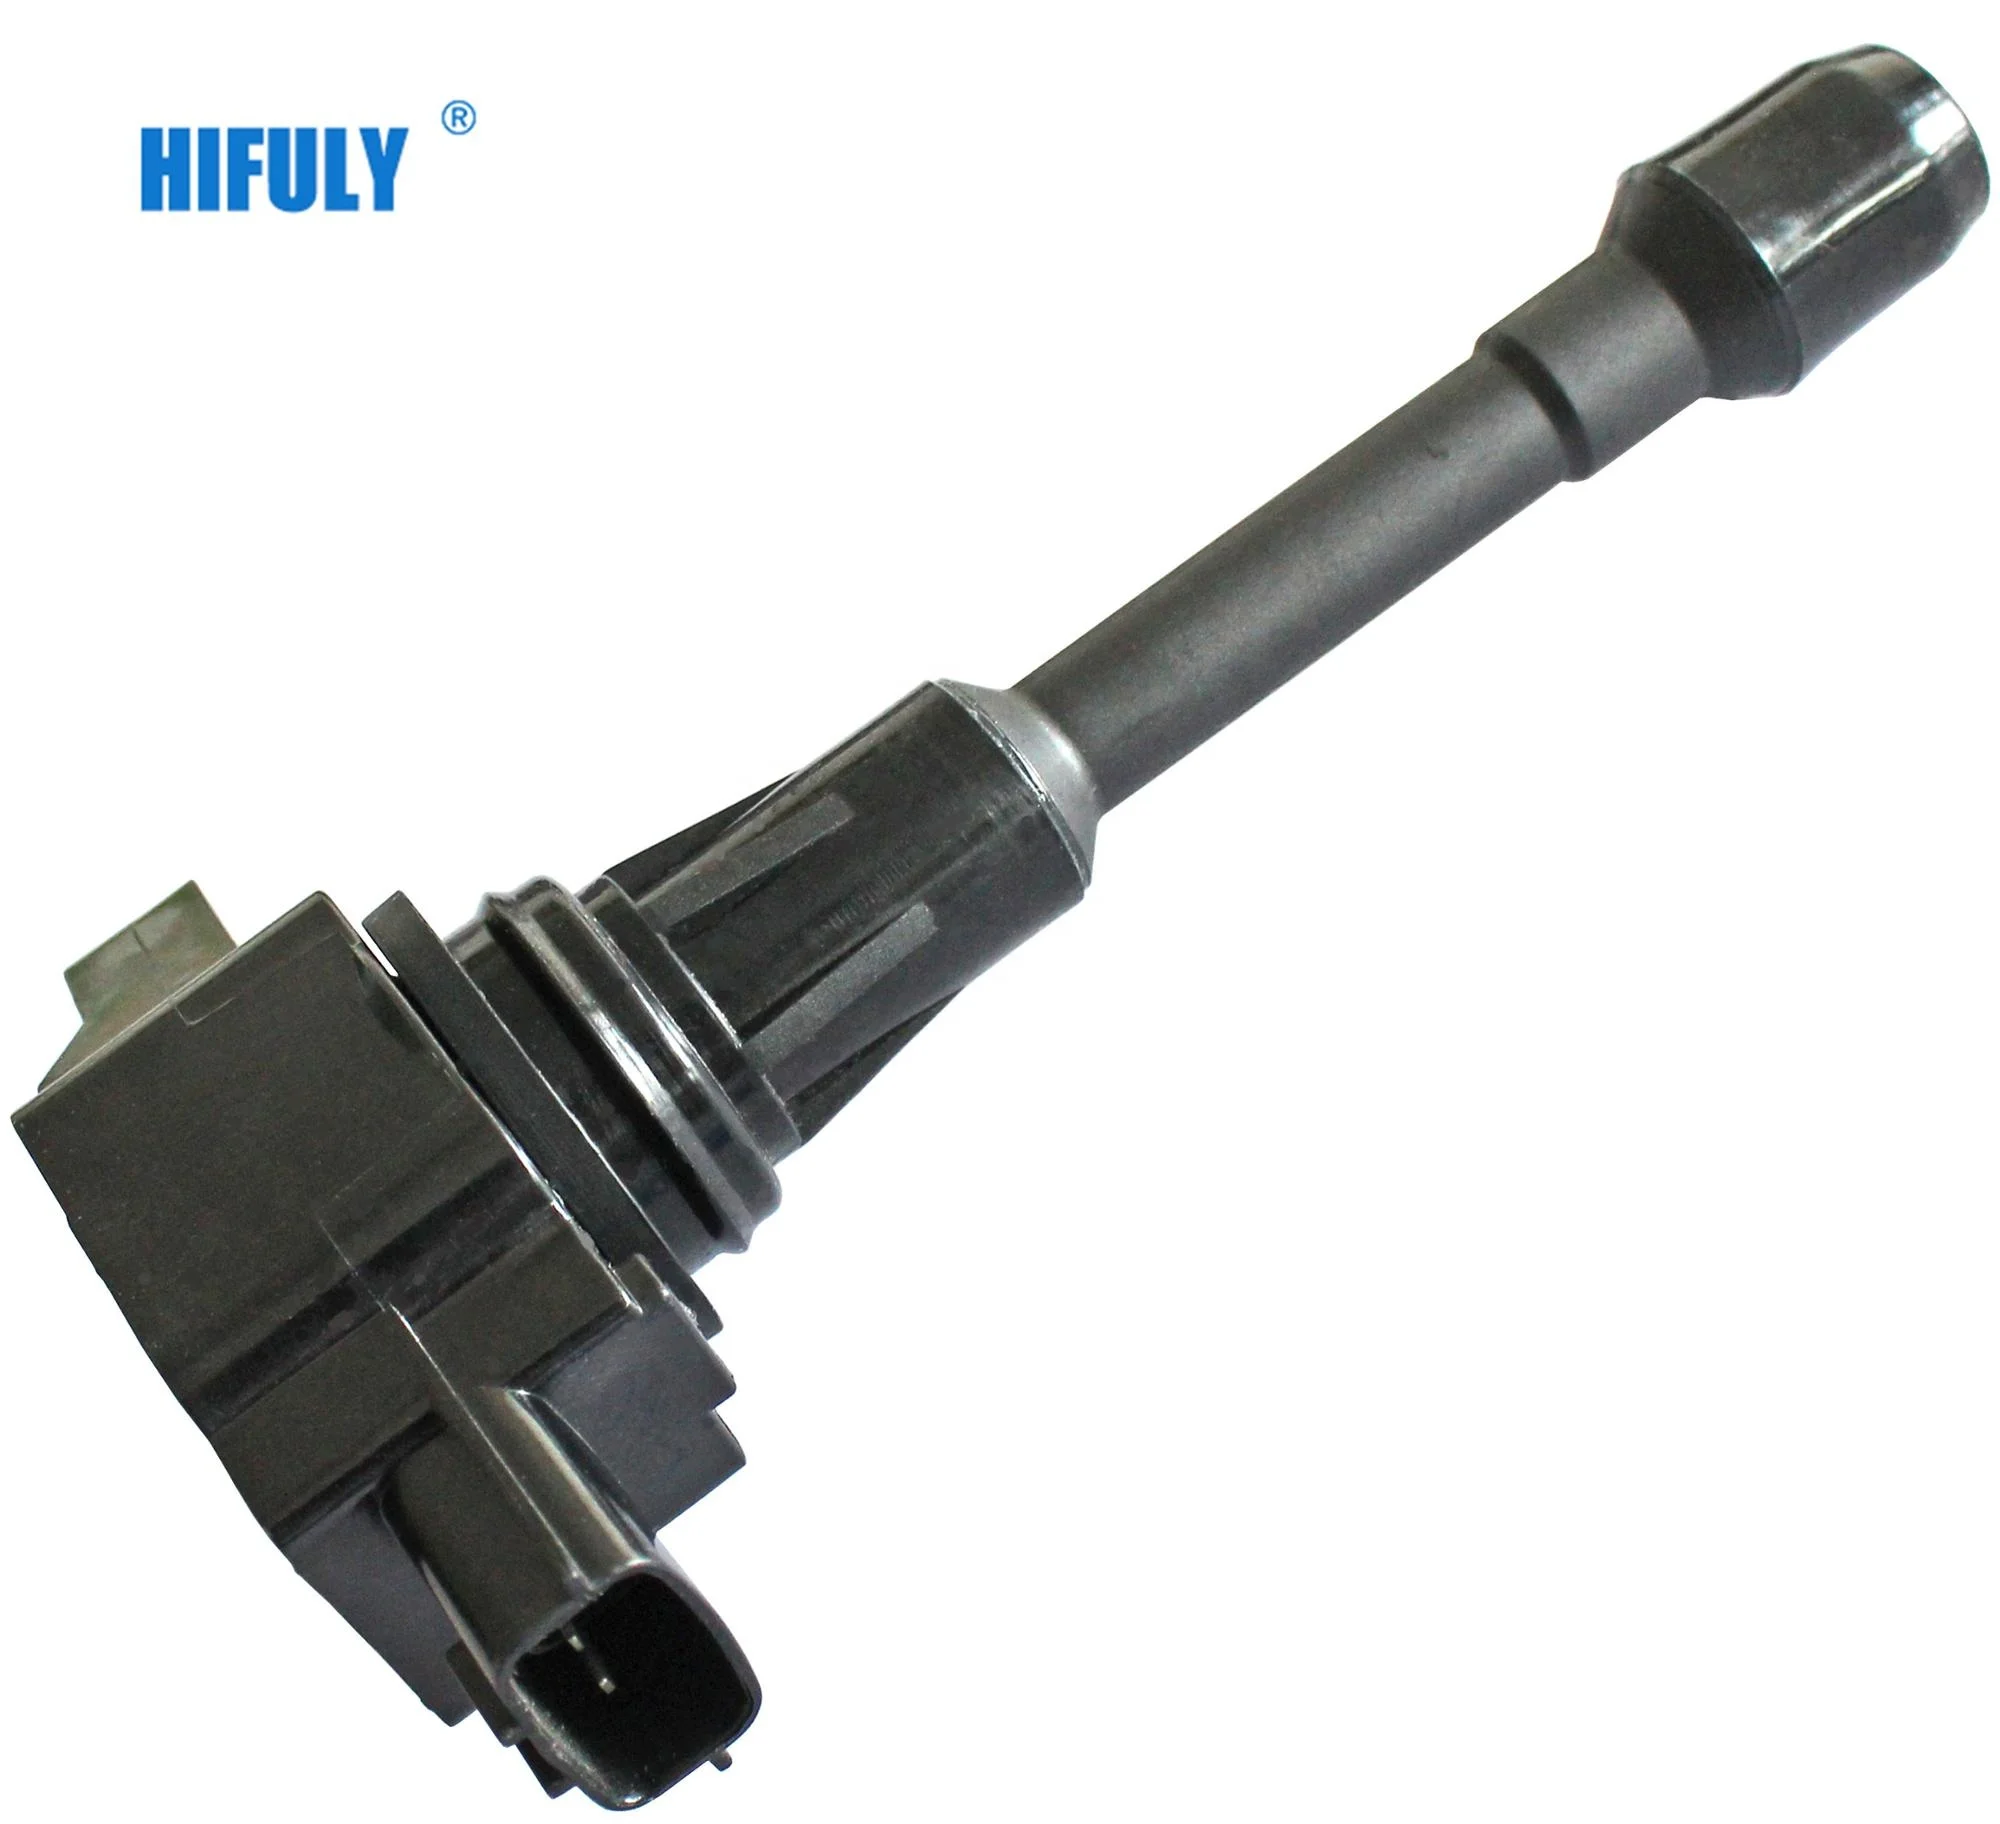 
22448 JA00C 22448 jf00b 22448 ED000 different types of engine oe quality ignition coil  (60742787754)